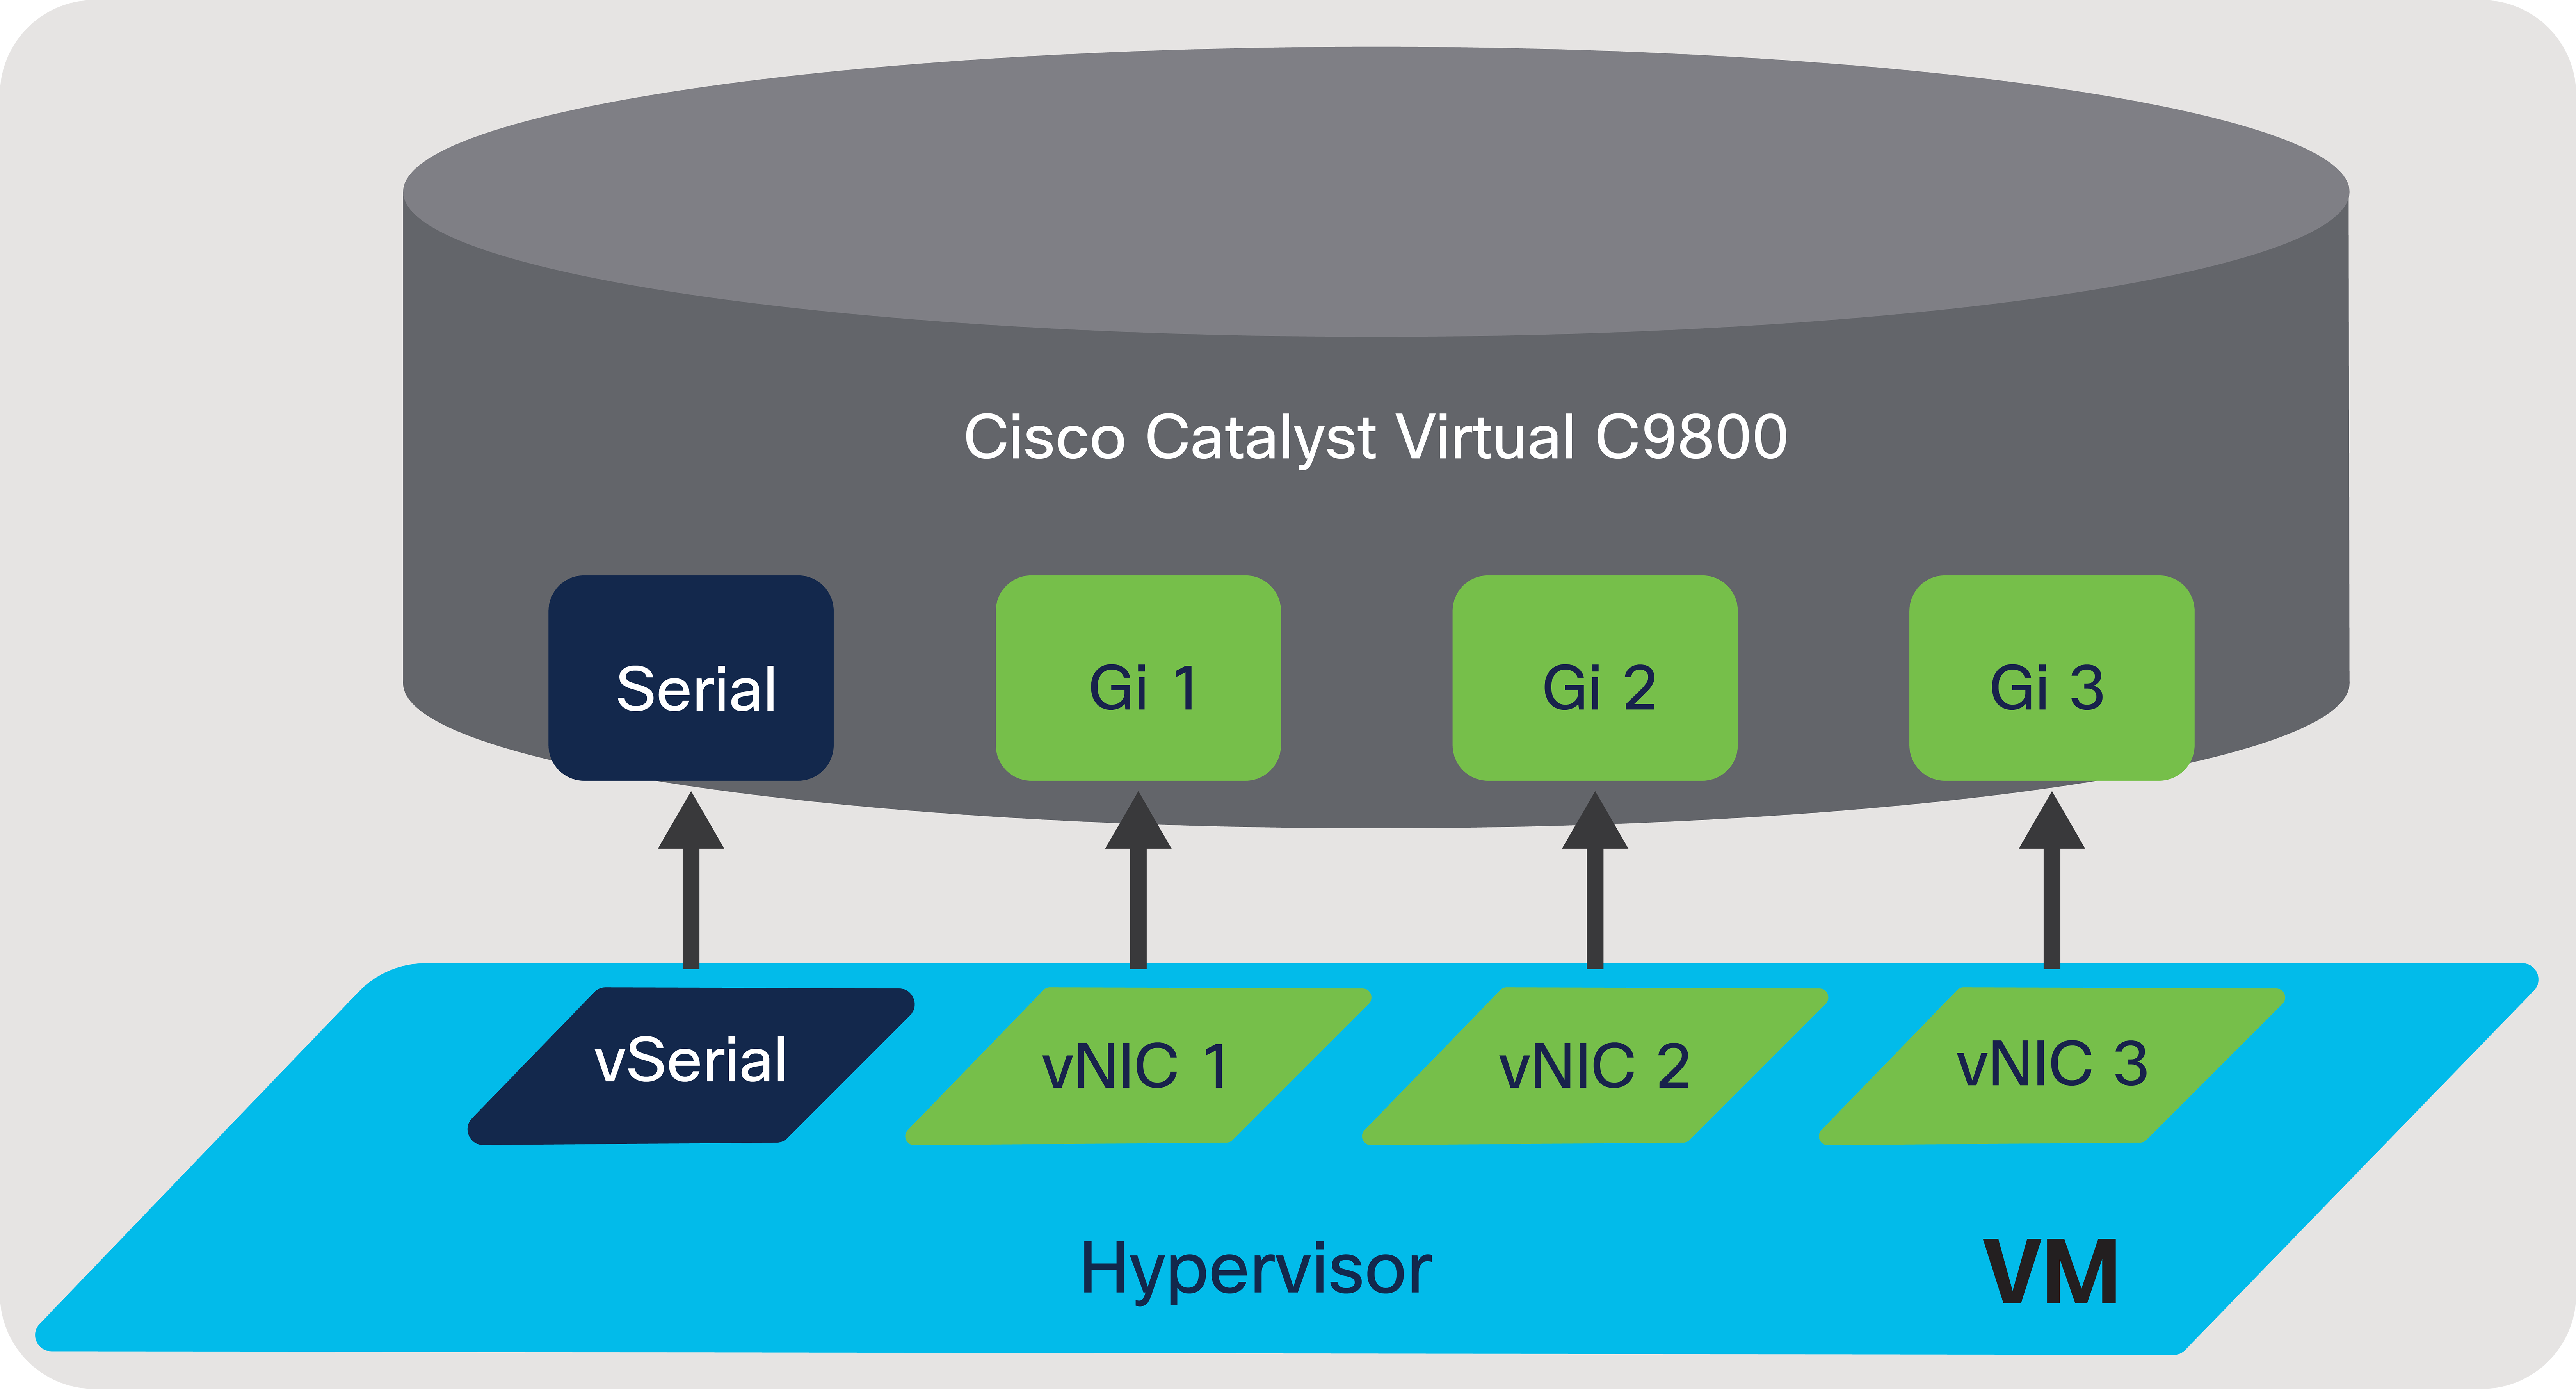 Mapping the vNICs to the Catalyst 9800-CL interfaces